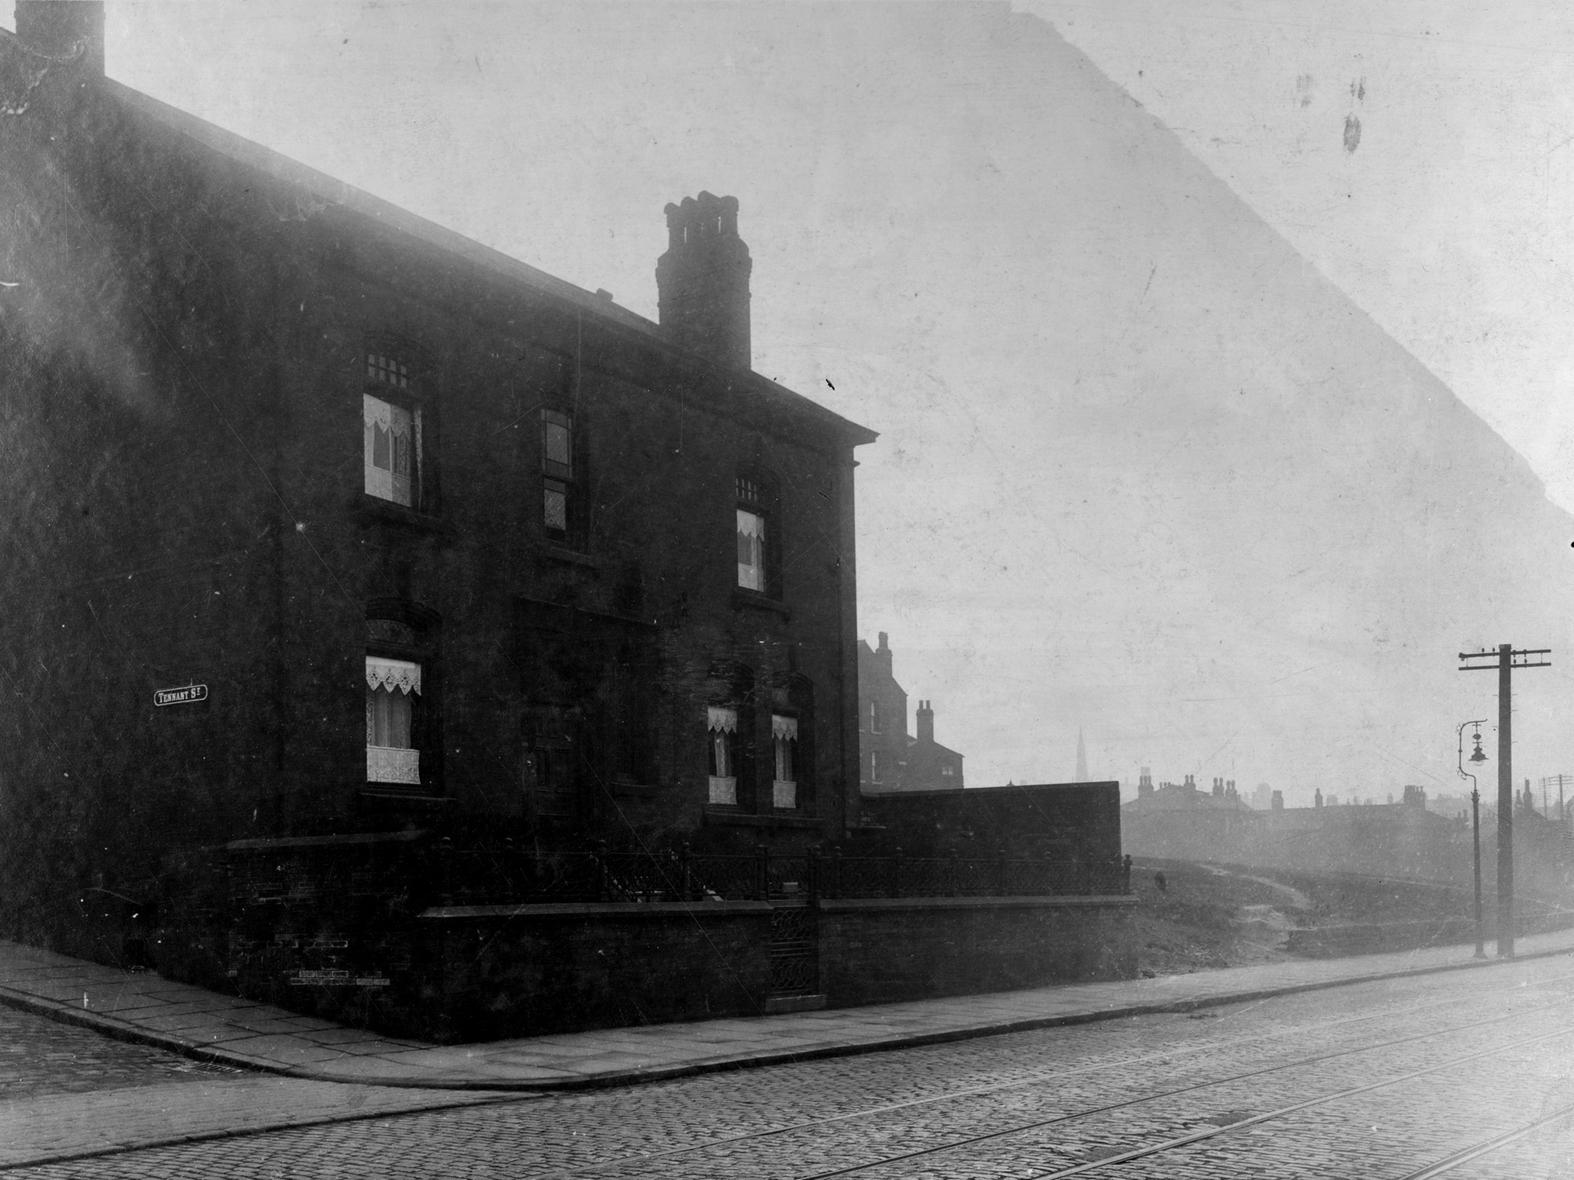 Armley Road at the junction with Tennant Street looking towards Low Moor Side. The house is number 149 owned by Arthur John Pollard, physician and surgeon.